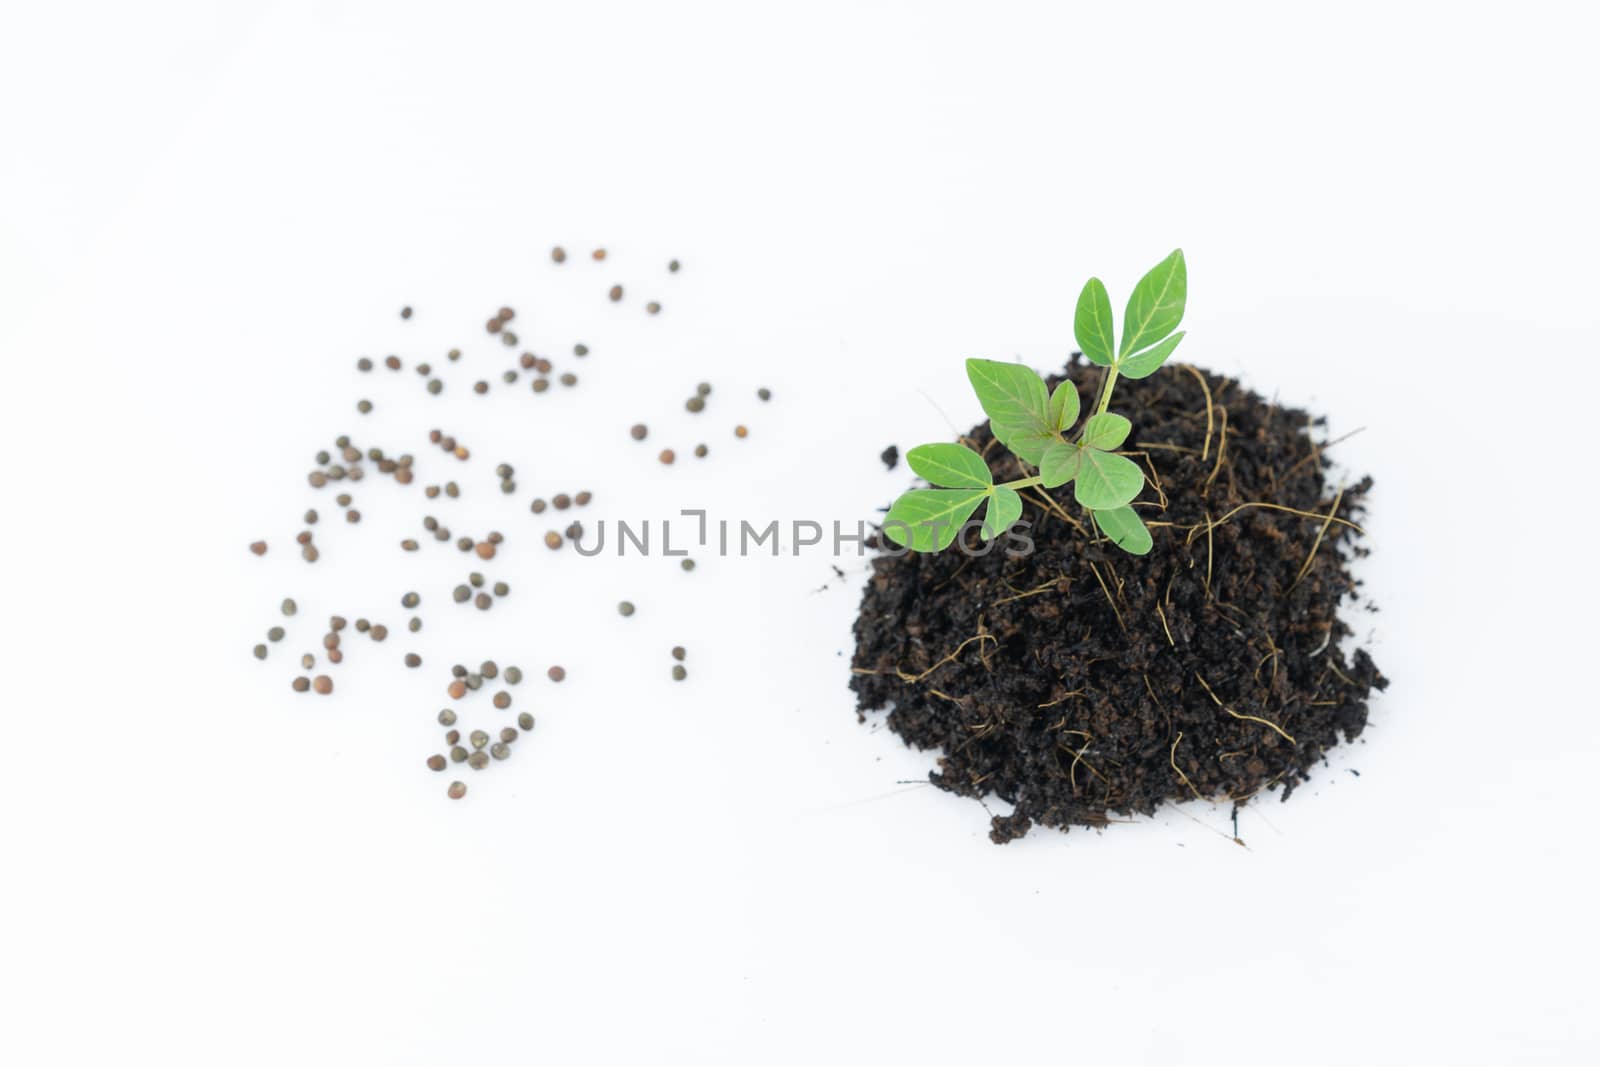 Seedlings and seeds on a white background